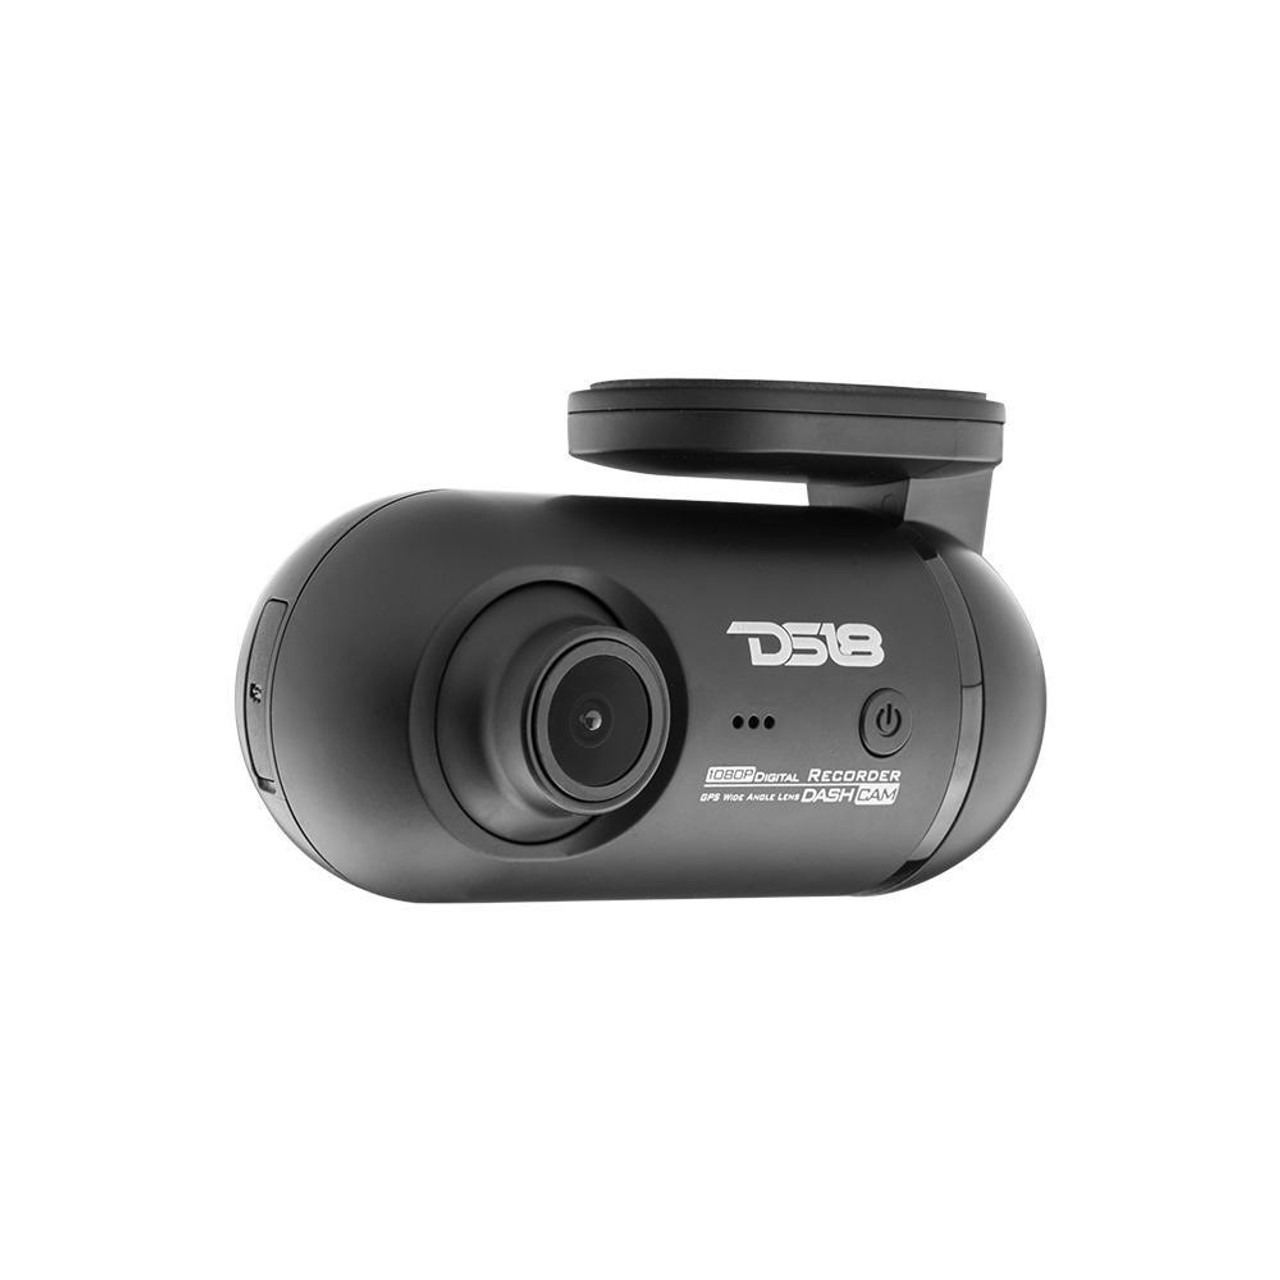 https://cdn11.bigcommerce.com/s-209k8v1/images/stencil/1280x1280/products/18938/41789/ds18-audio-ds18-bbx2-detachable-dvr-dash-cam-with-2.45-screen-front-and-rear-camera-1080hd-gps-and-wi-fiadas__90632.1658940570.jpg?c=2&imbypass=on